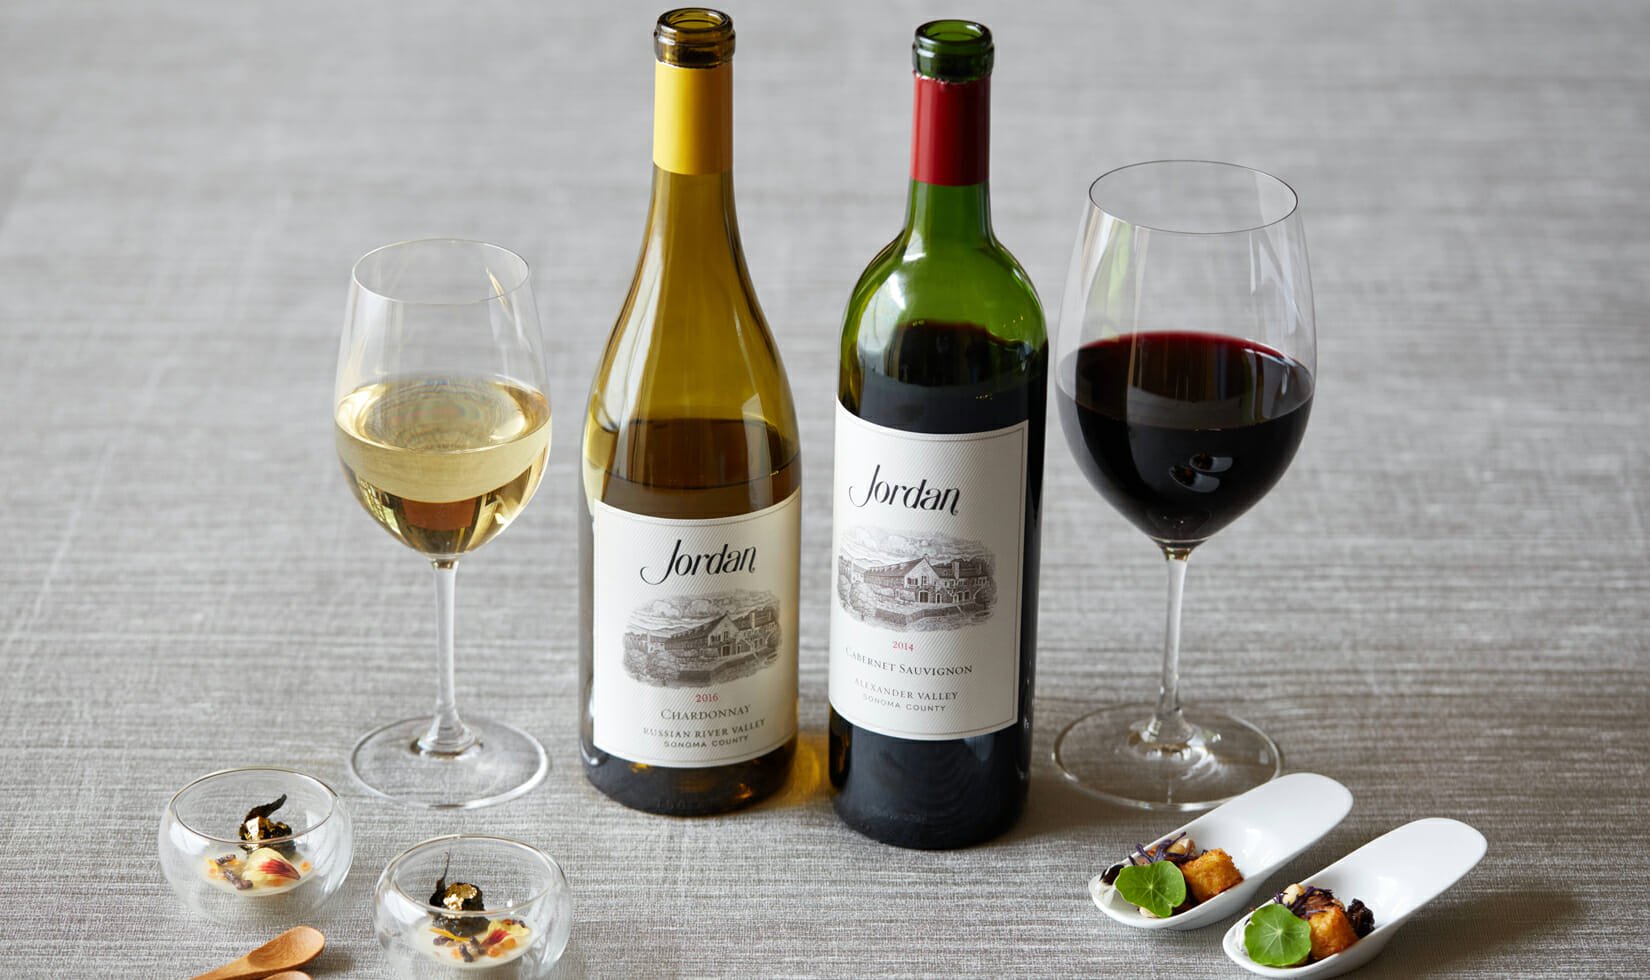 a bottle of Jordan Winery Chardonnay and Jordan Winery Cabernet next to two poured glasses of wine and small food bites